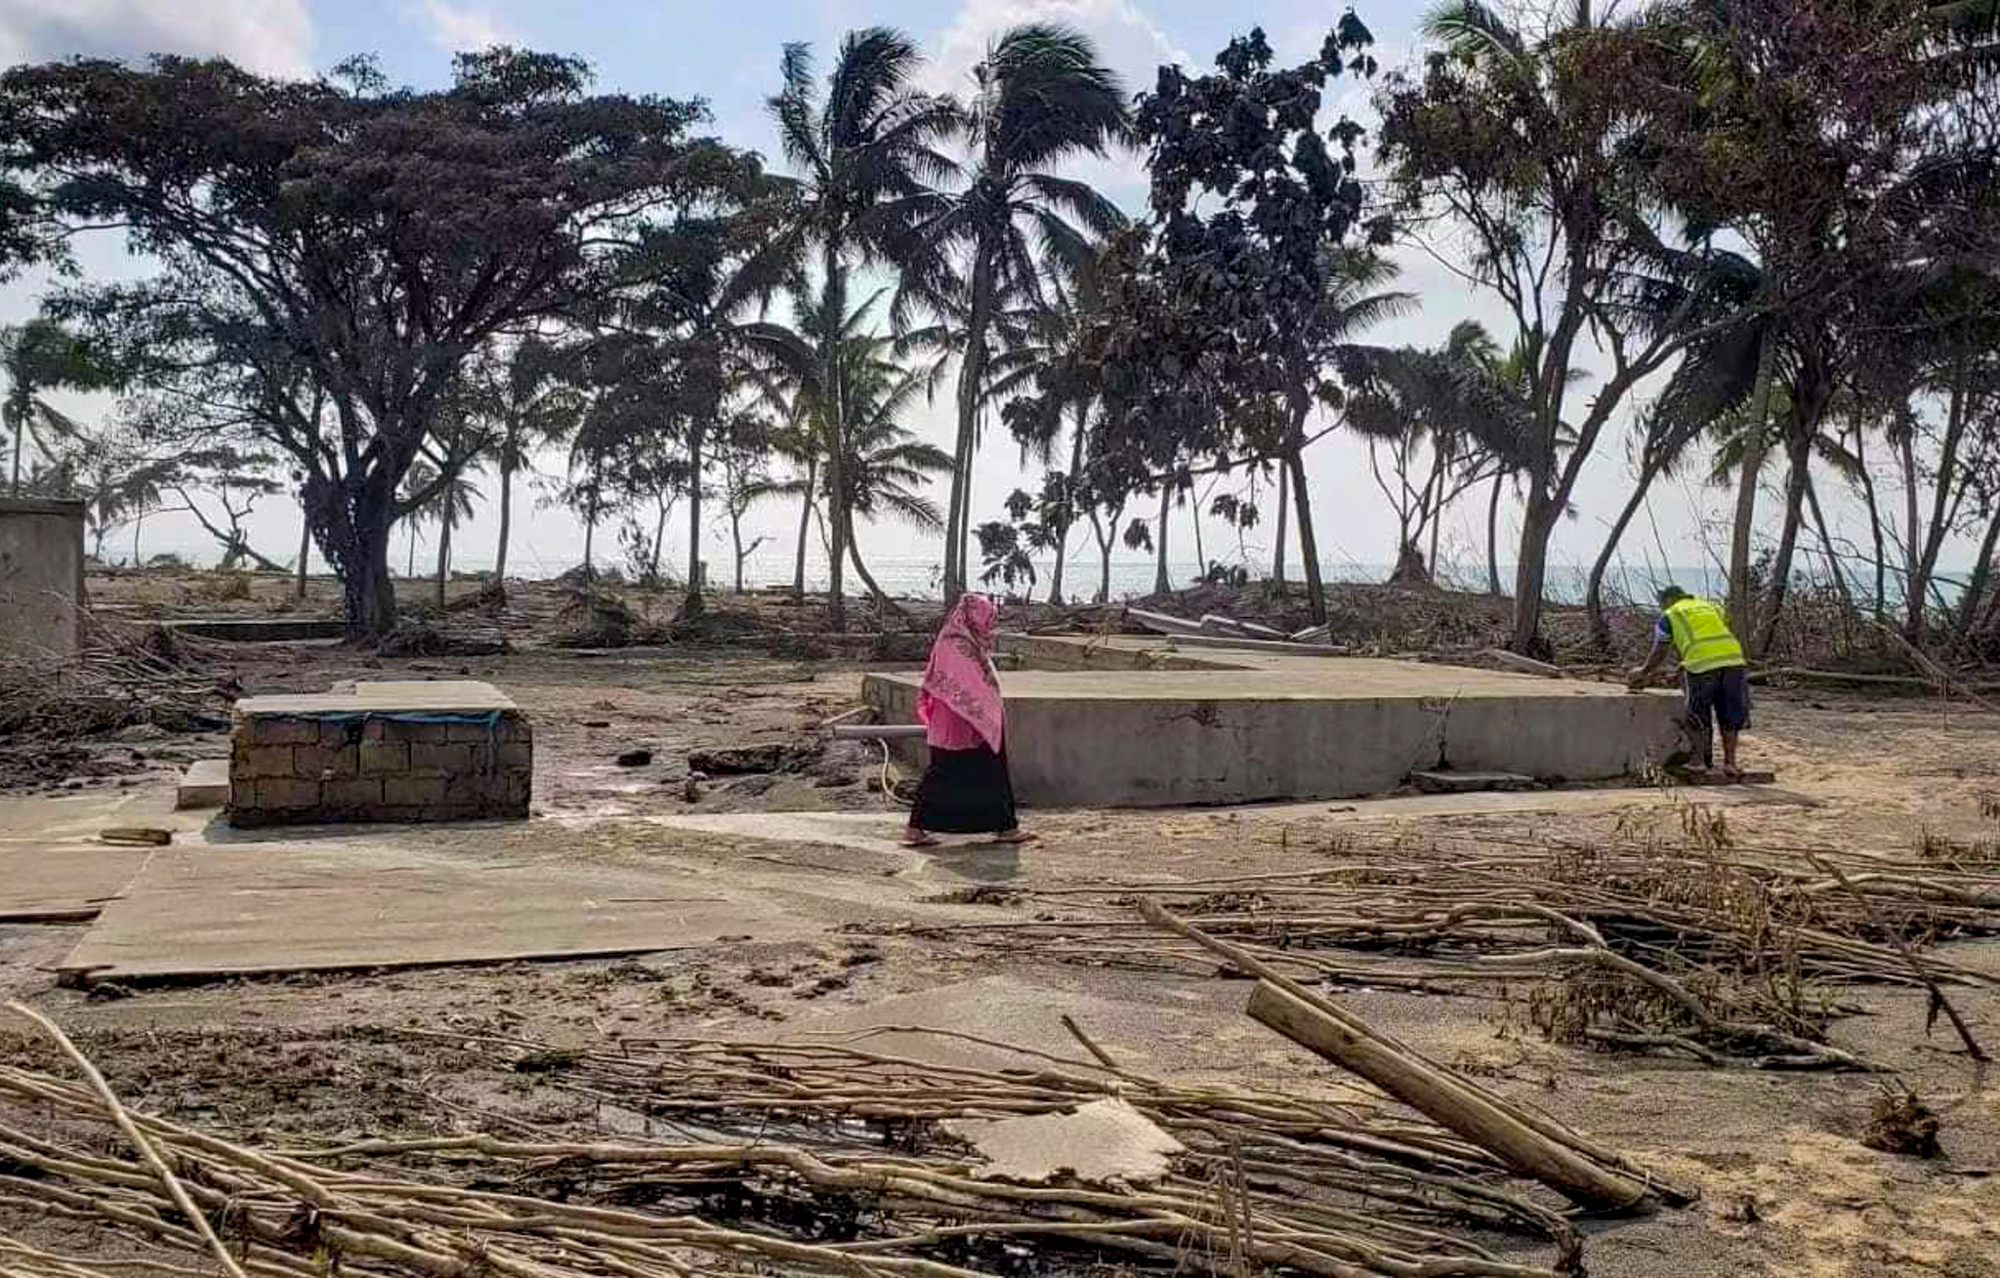 A person stands on a beach resort, wrecked by a tsunami